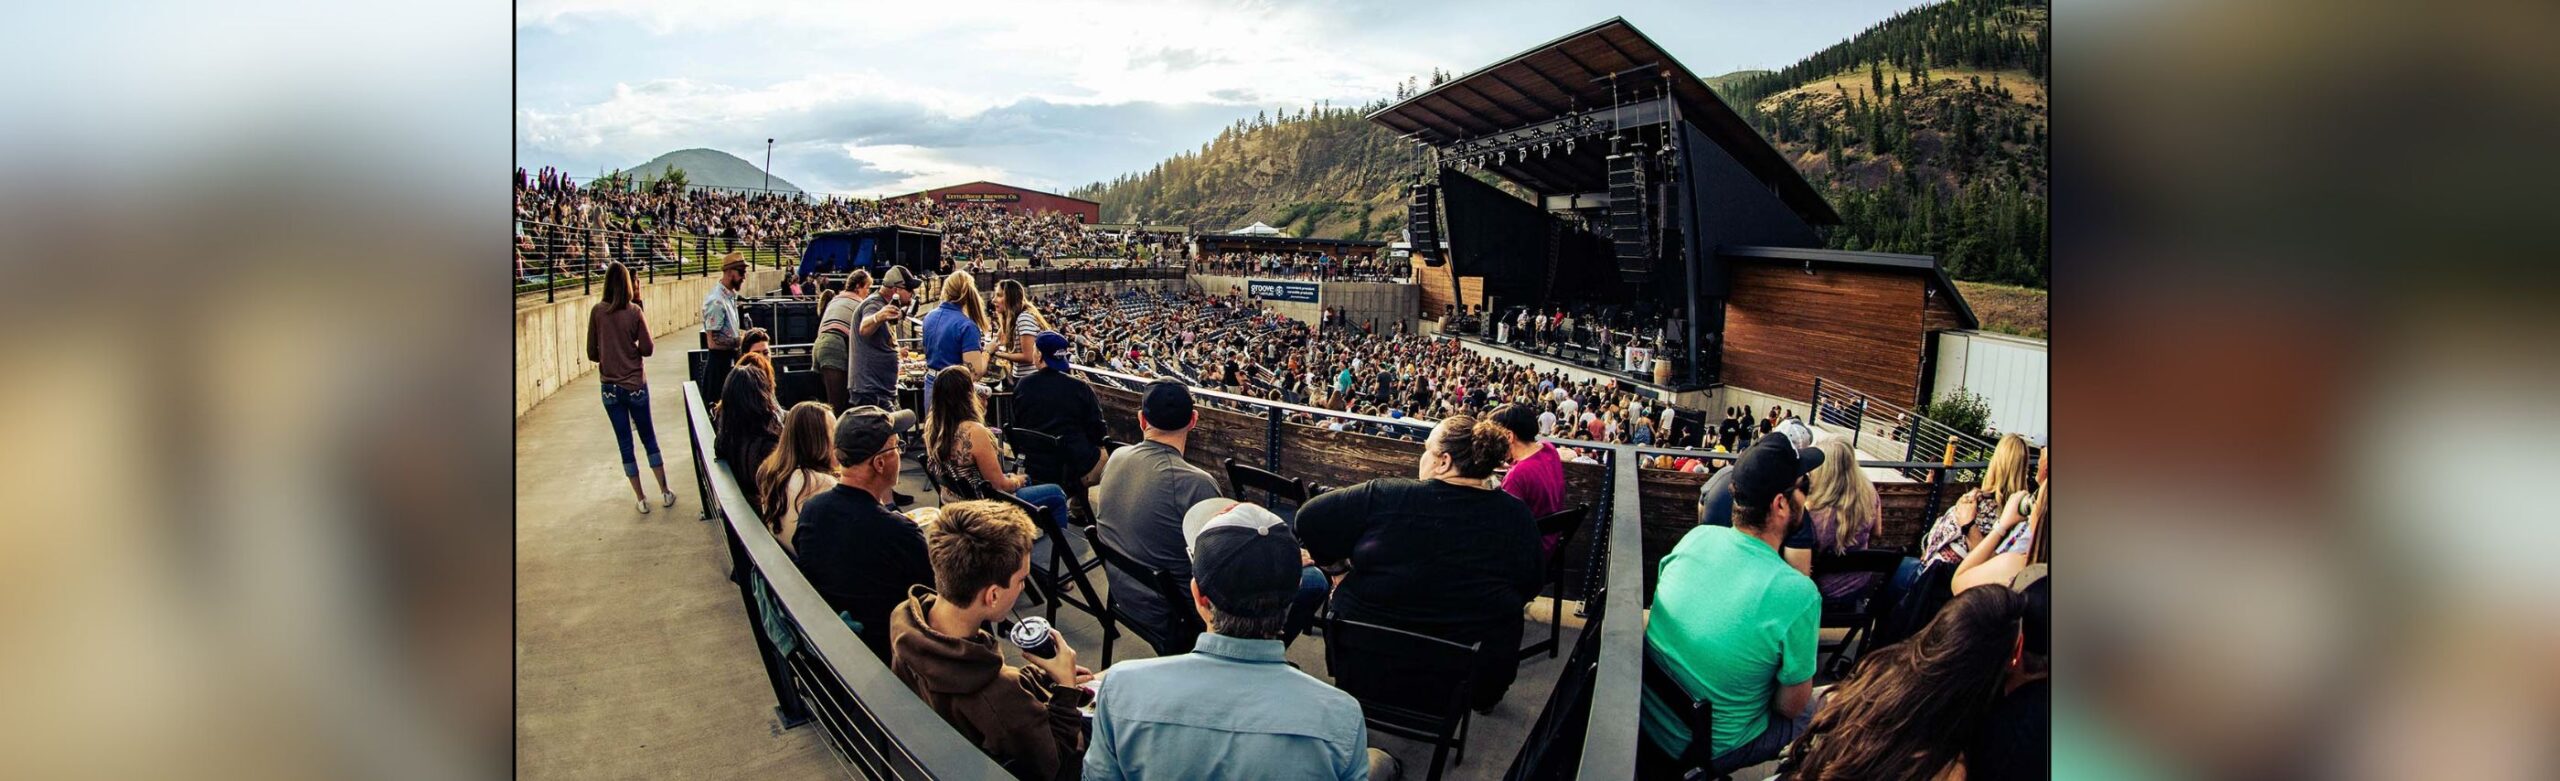 Now Available: Premium Box Seats for Incubus at KettleHouse Amphitheater Image